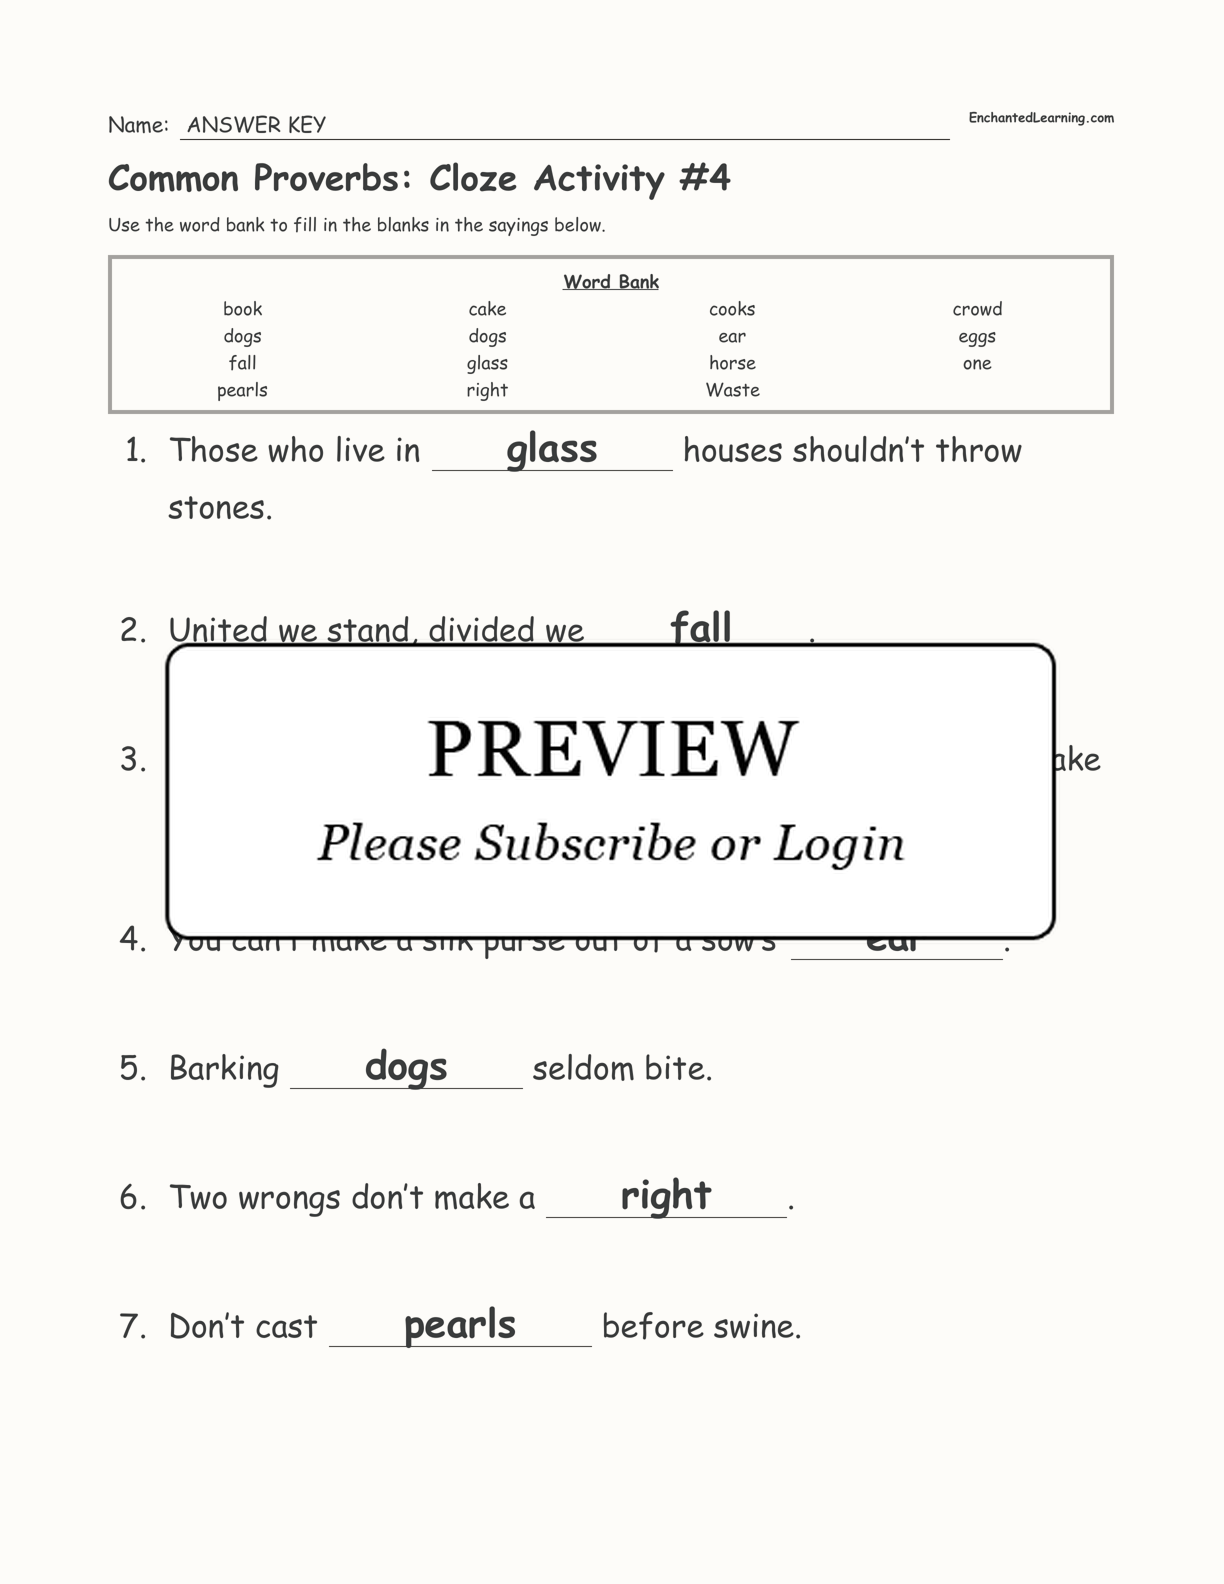 Common Proverbs: Cloze Activity #4 interactive worksheet page 3